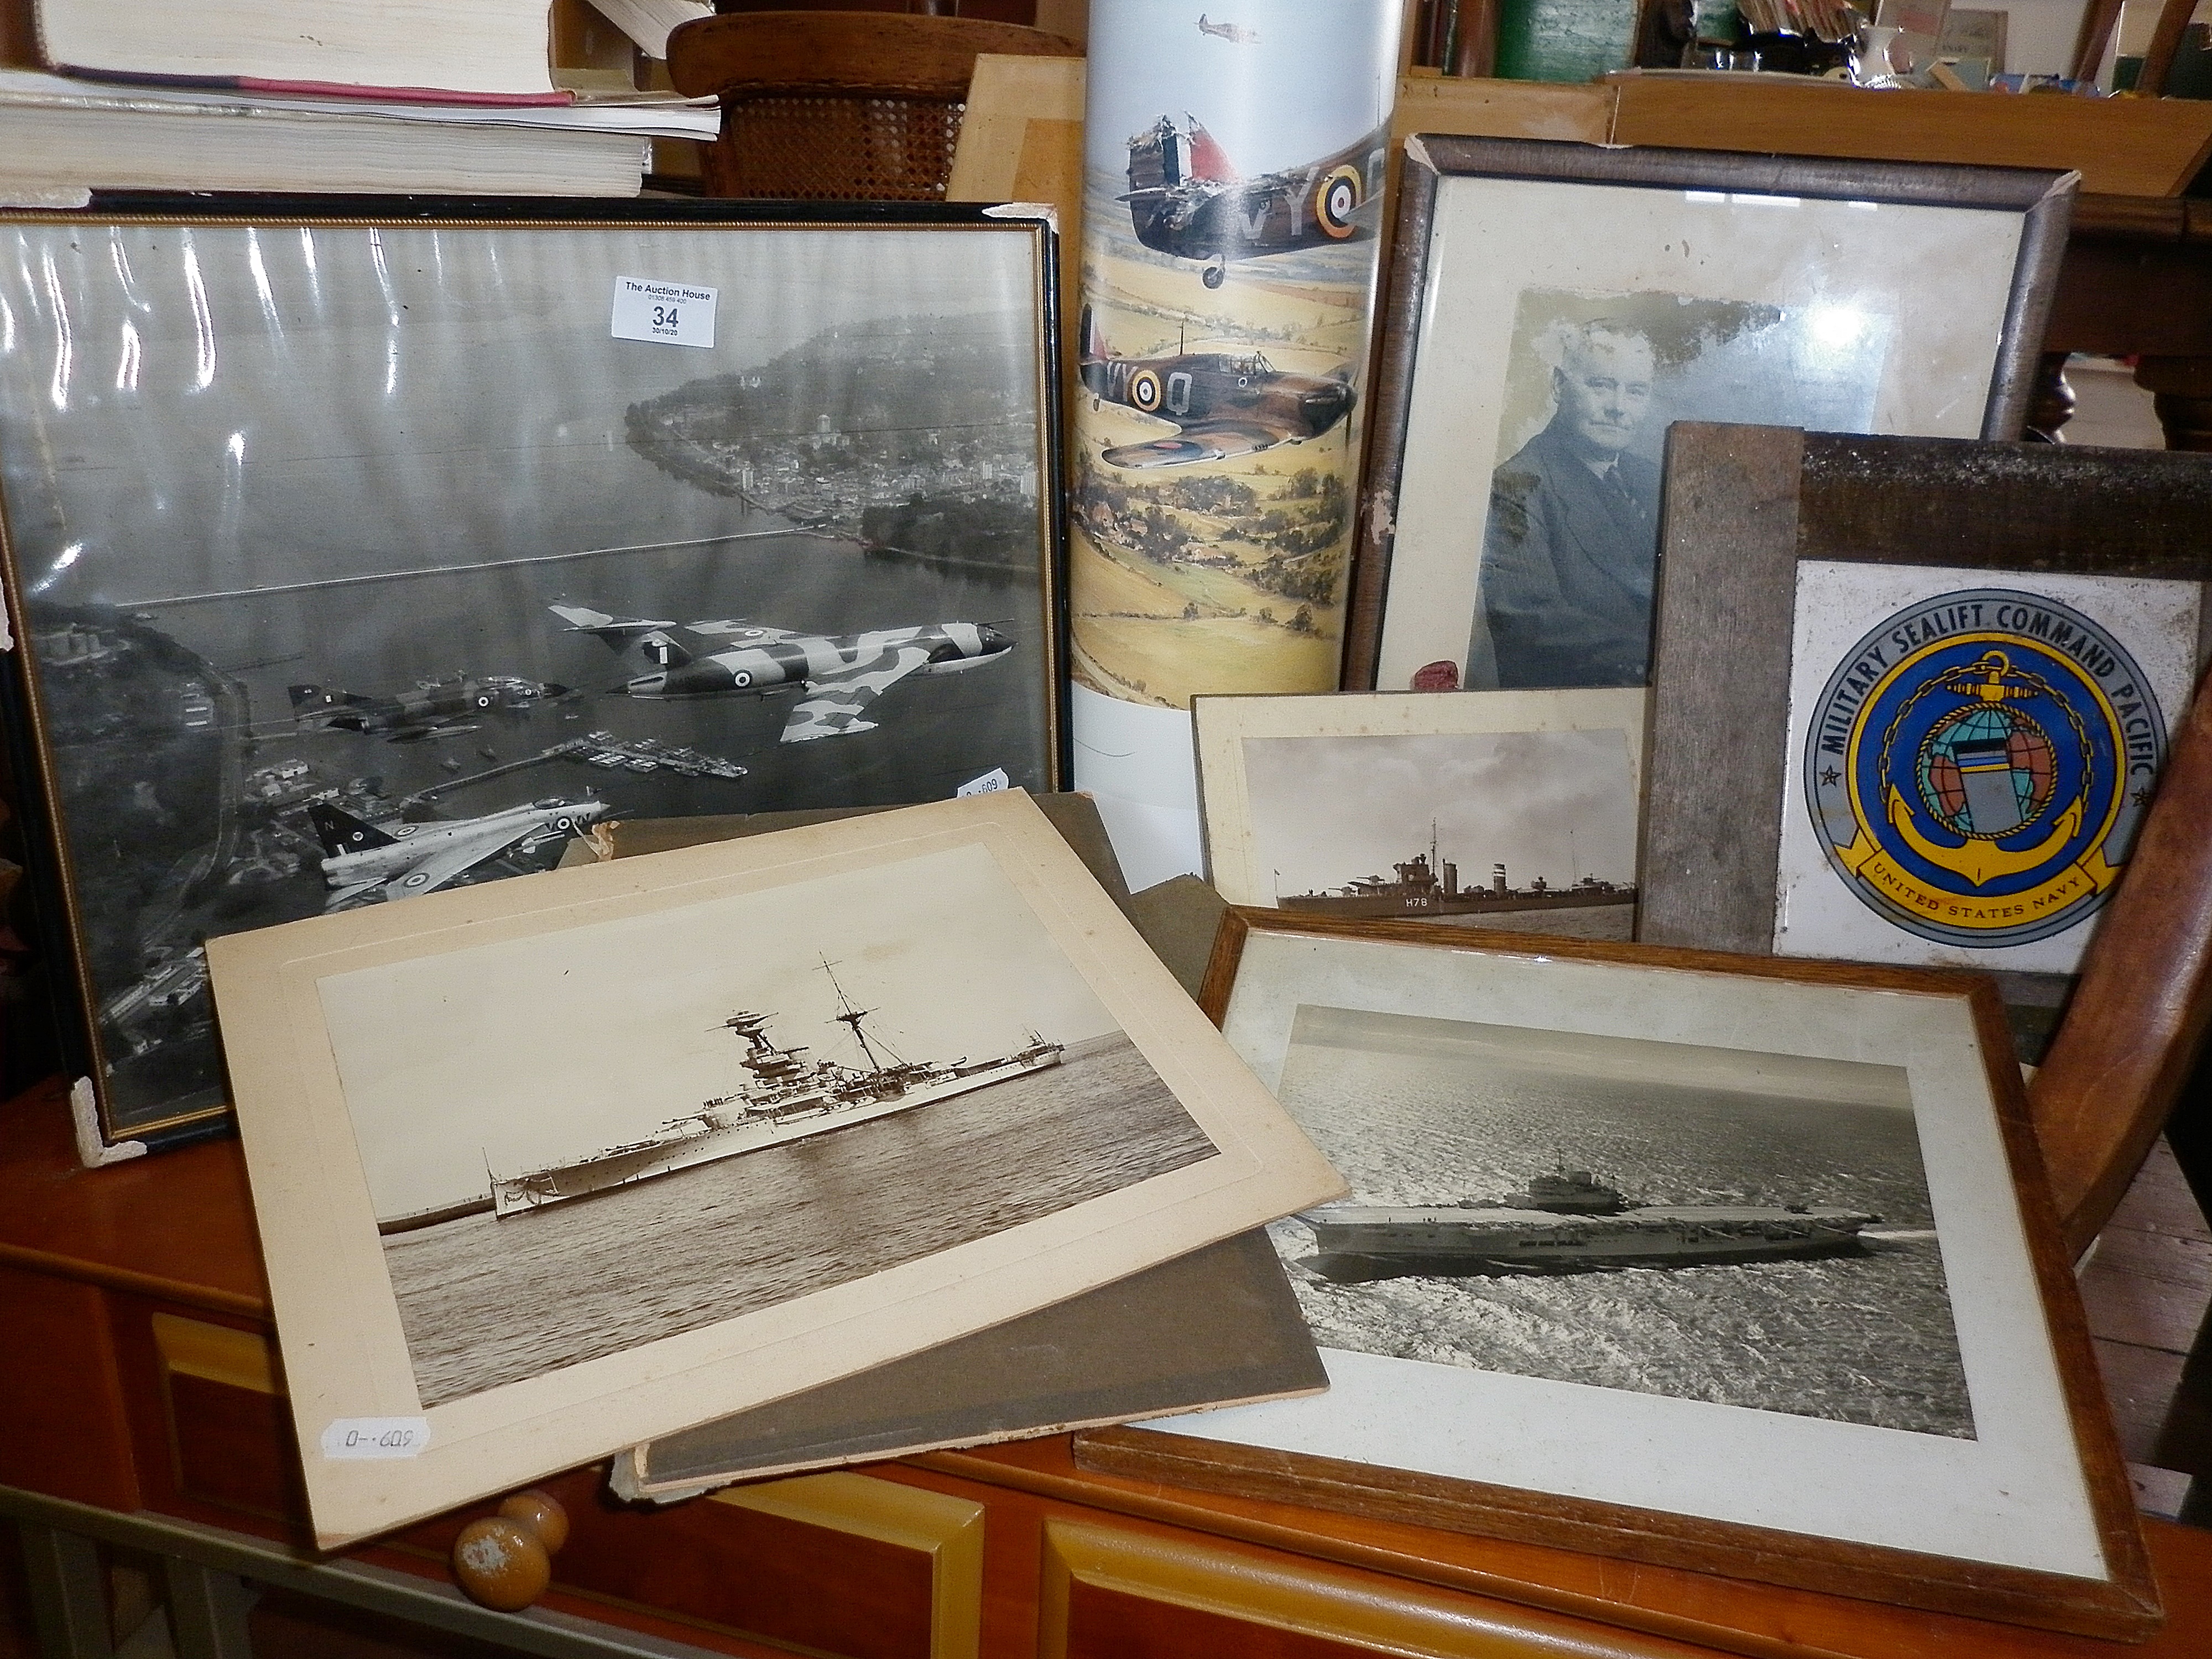 Album of sepia snapshots of liners, ships and people and other photographs including a black and